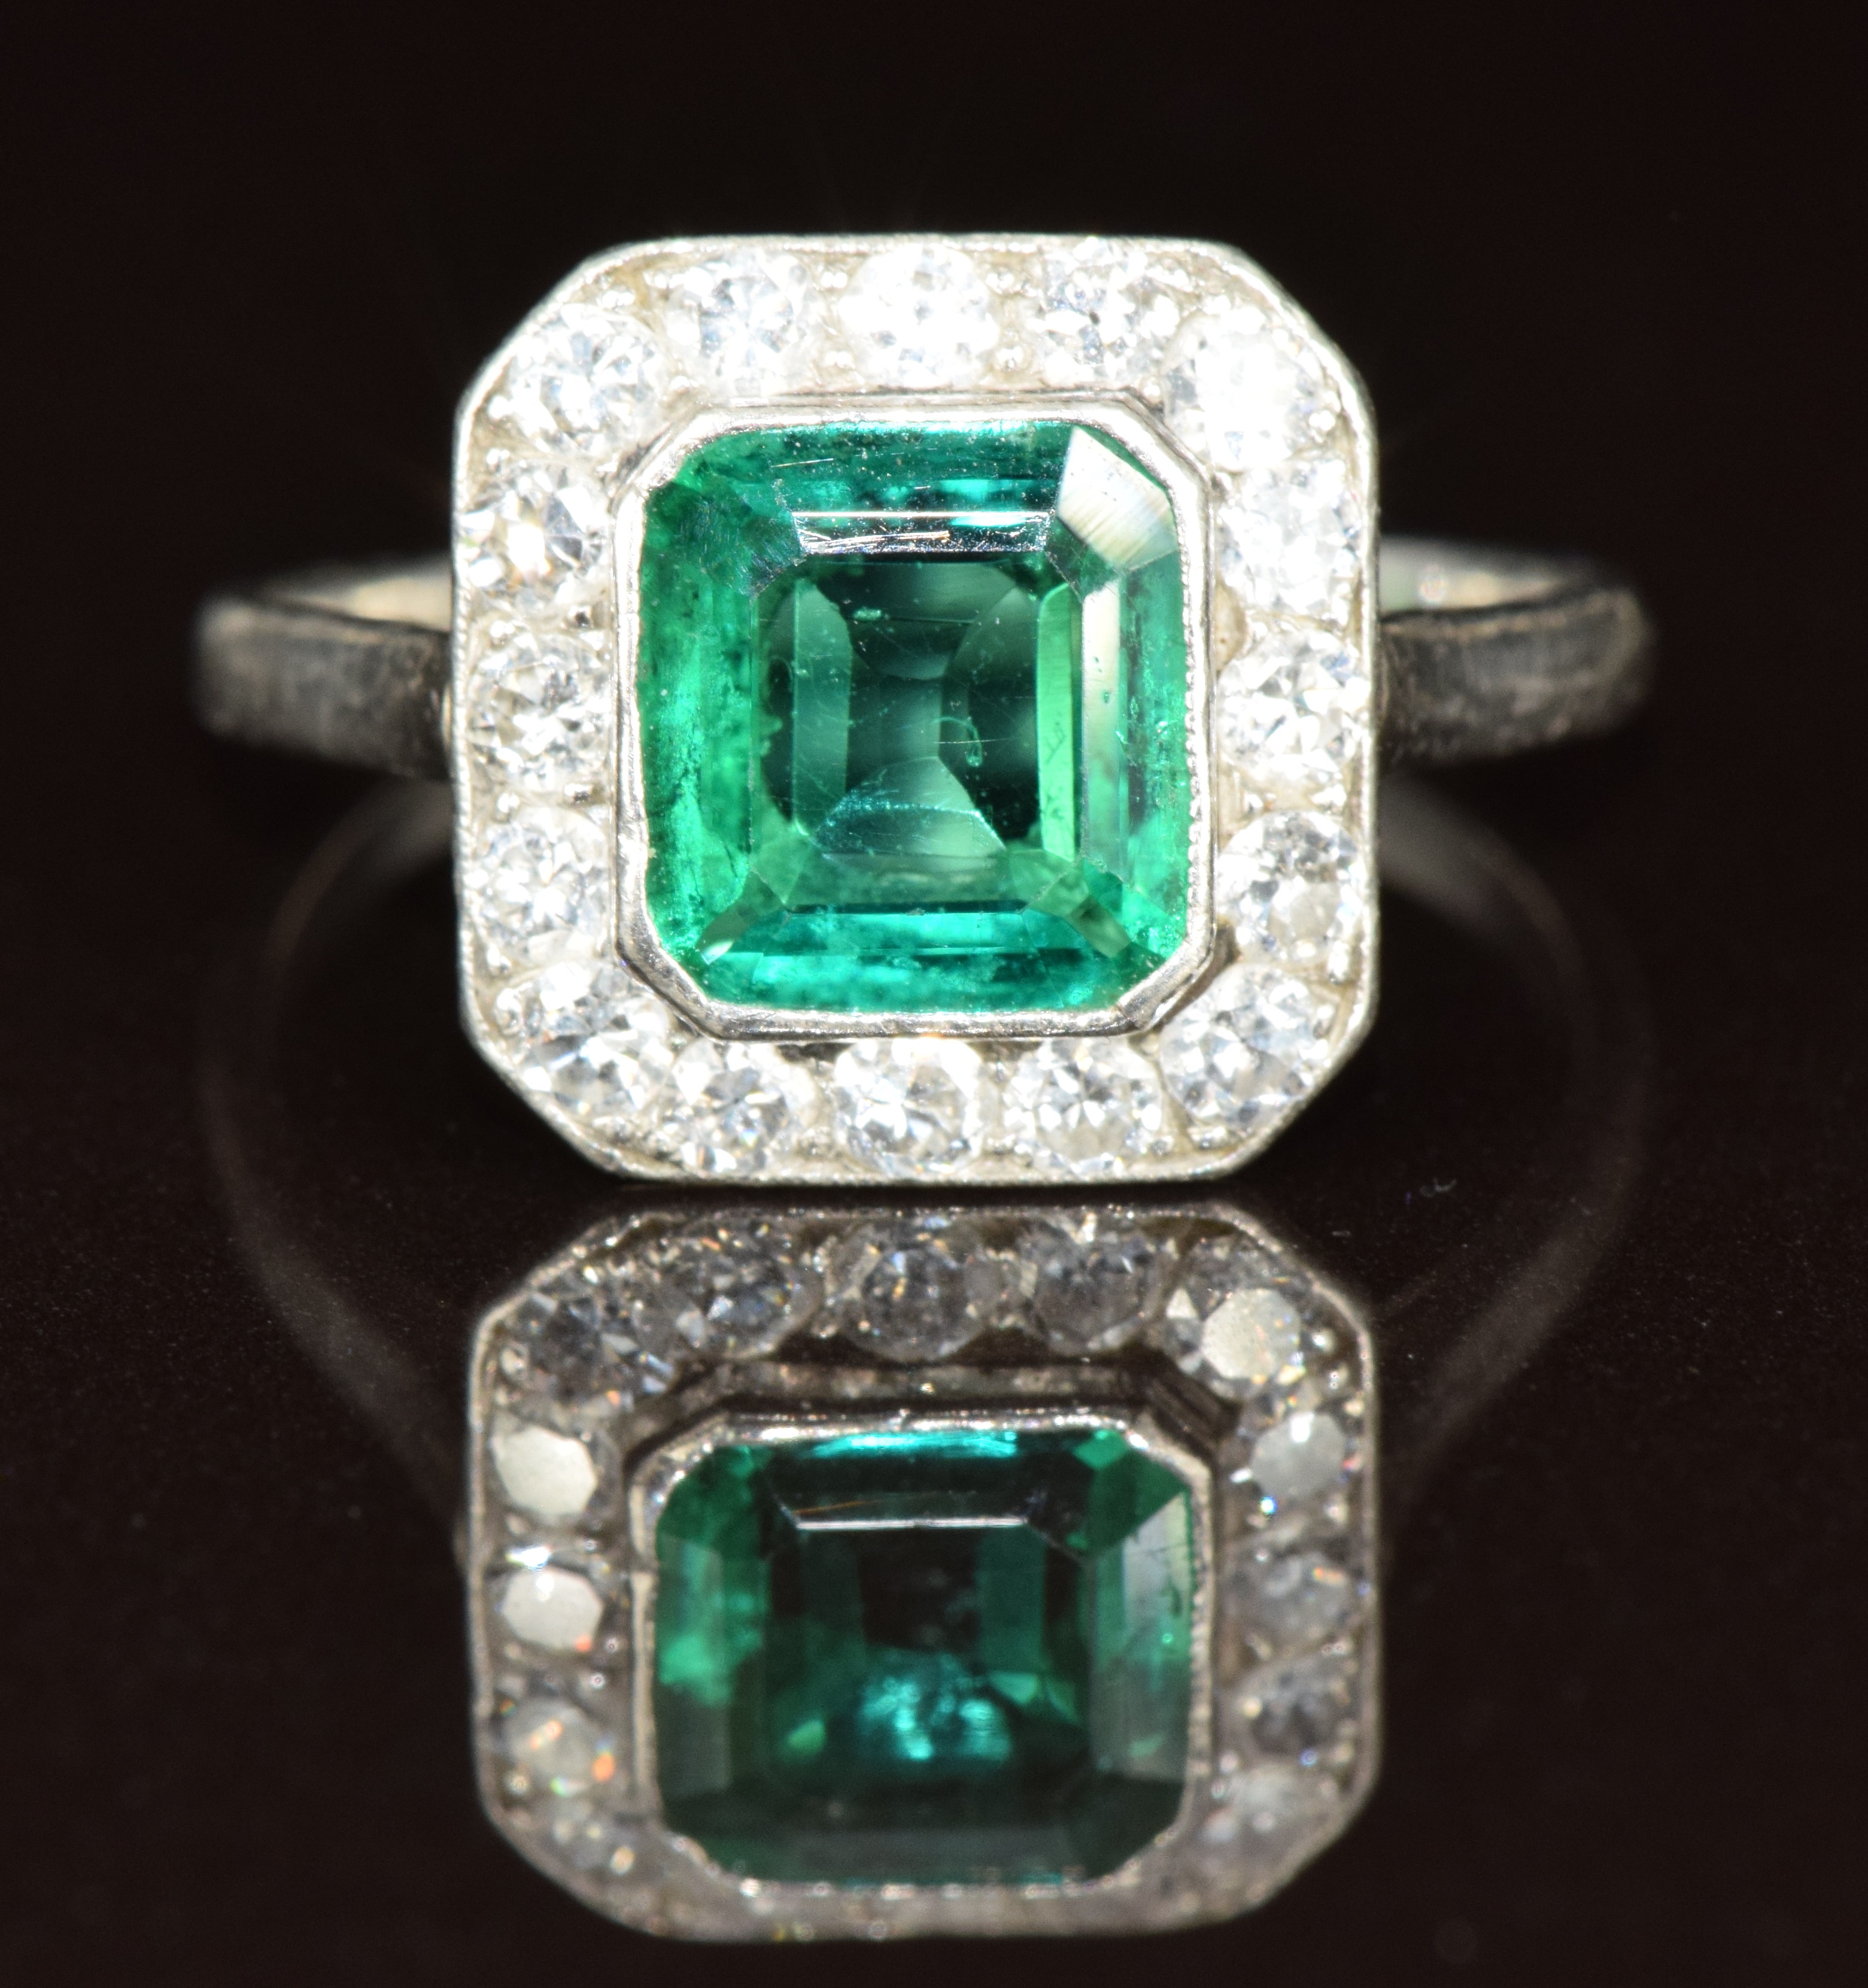 Art Deco platinum ring set with an emerald cut emerald of approximately 1ct surrounded by 16 round - Image 2 of 4